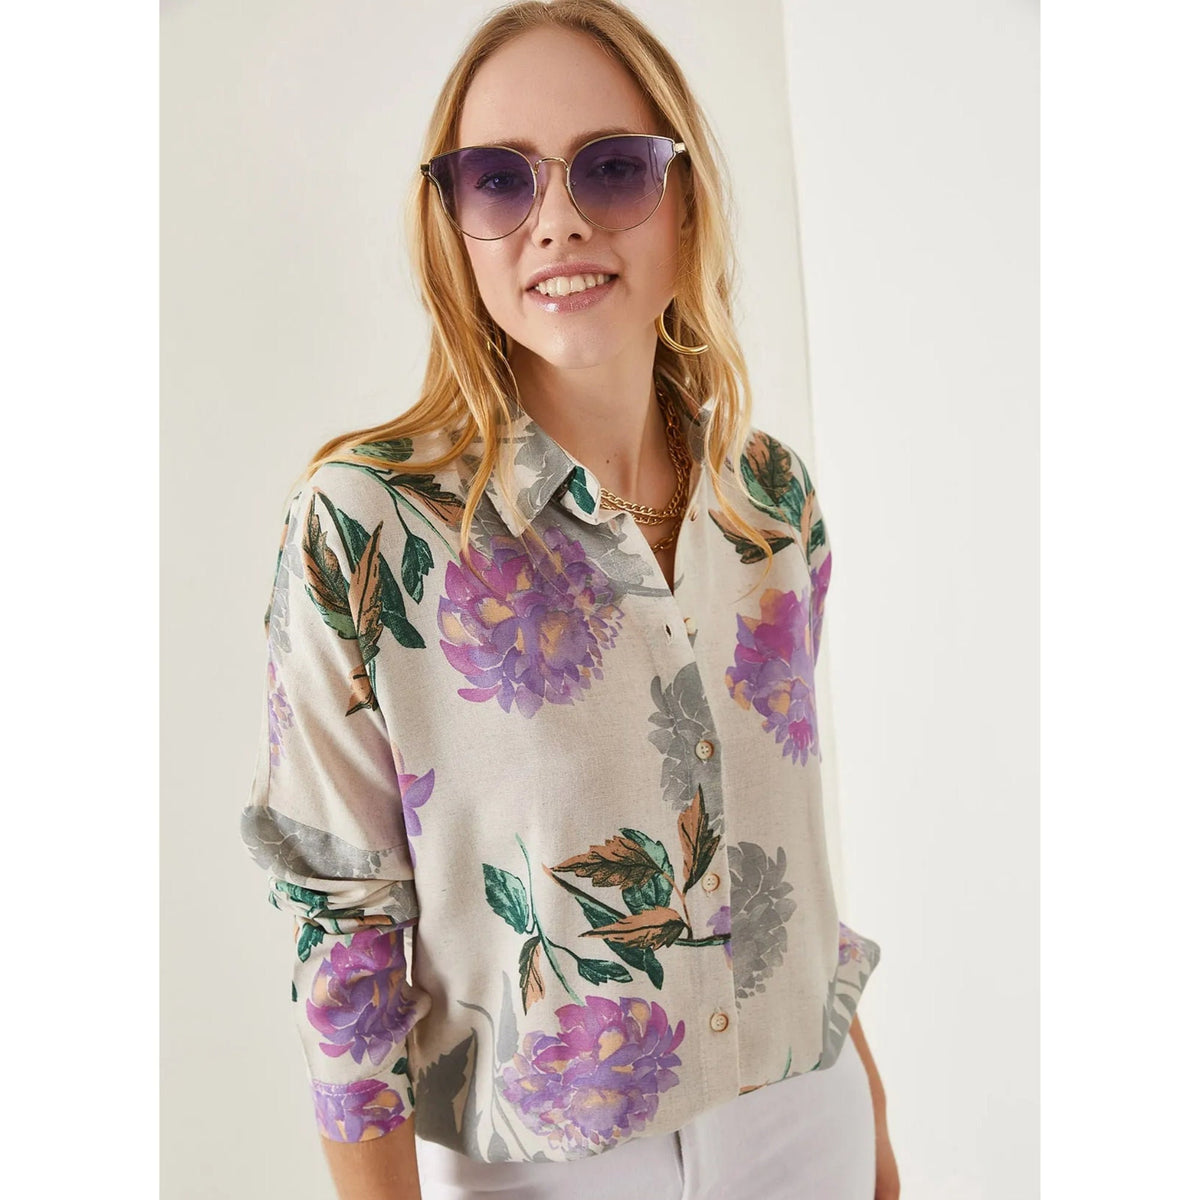 Stone Lilac Oval Bat Oversize Linen Viscose Woman Blouse With Pocket,Vintage Blouse,Floral Pattern Blouse, Gift For Her, Collar Blouse